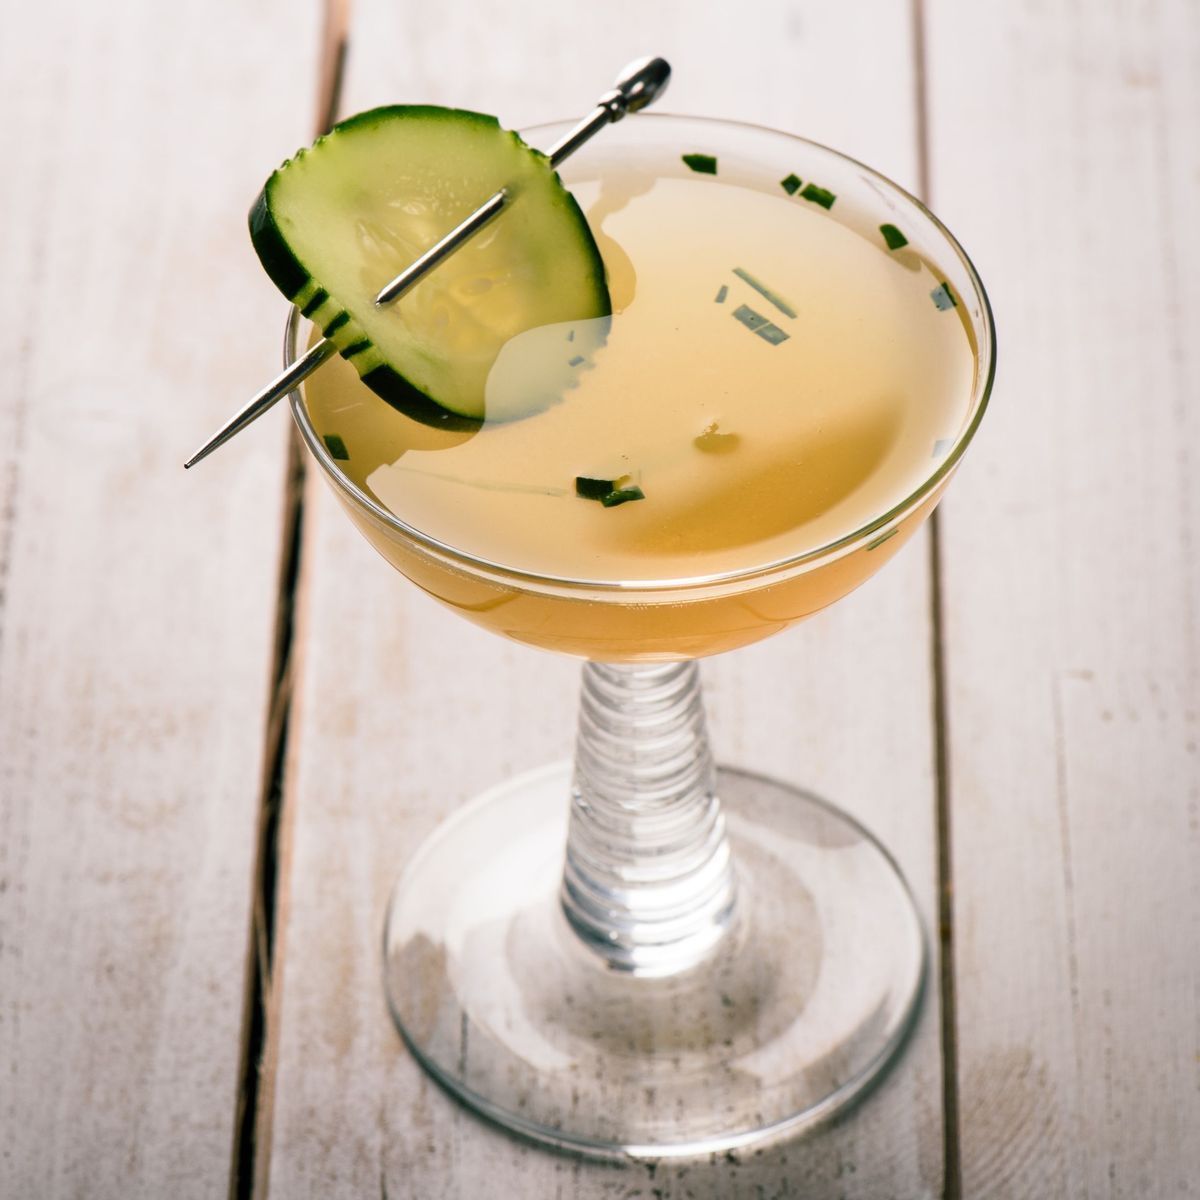 This is a classic limey cocktail.